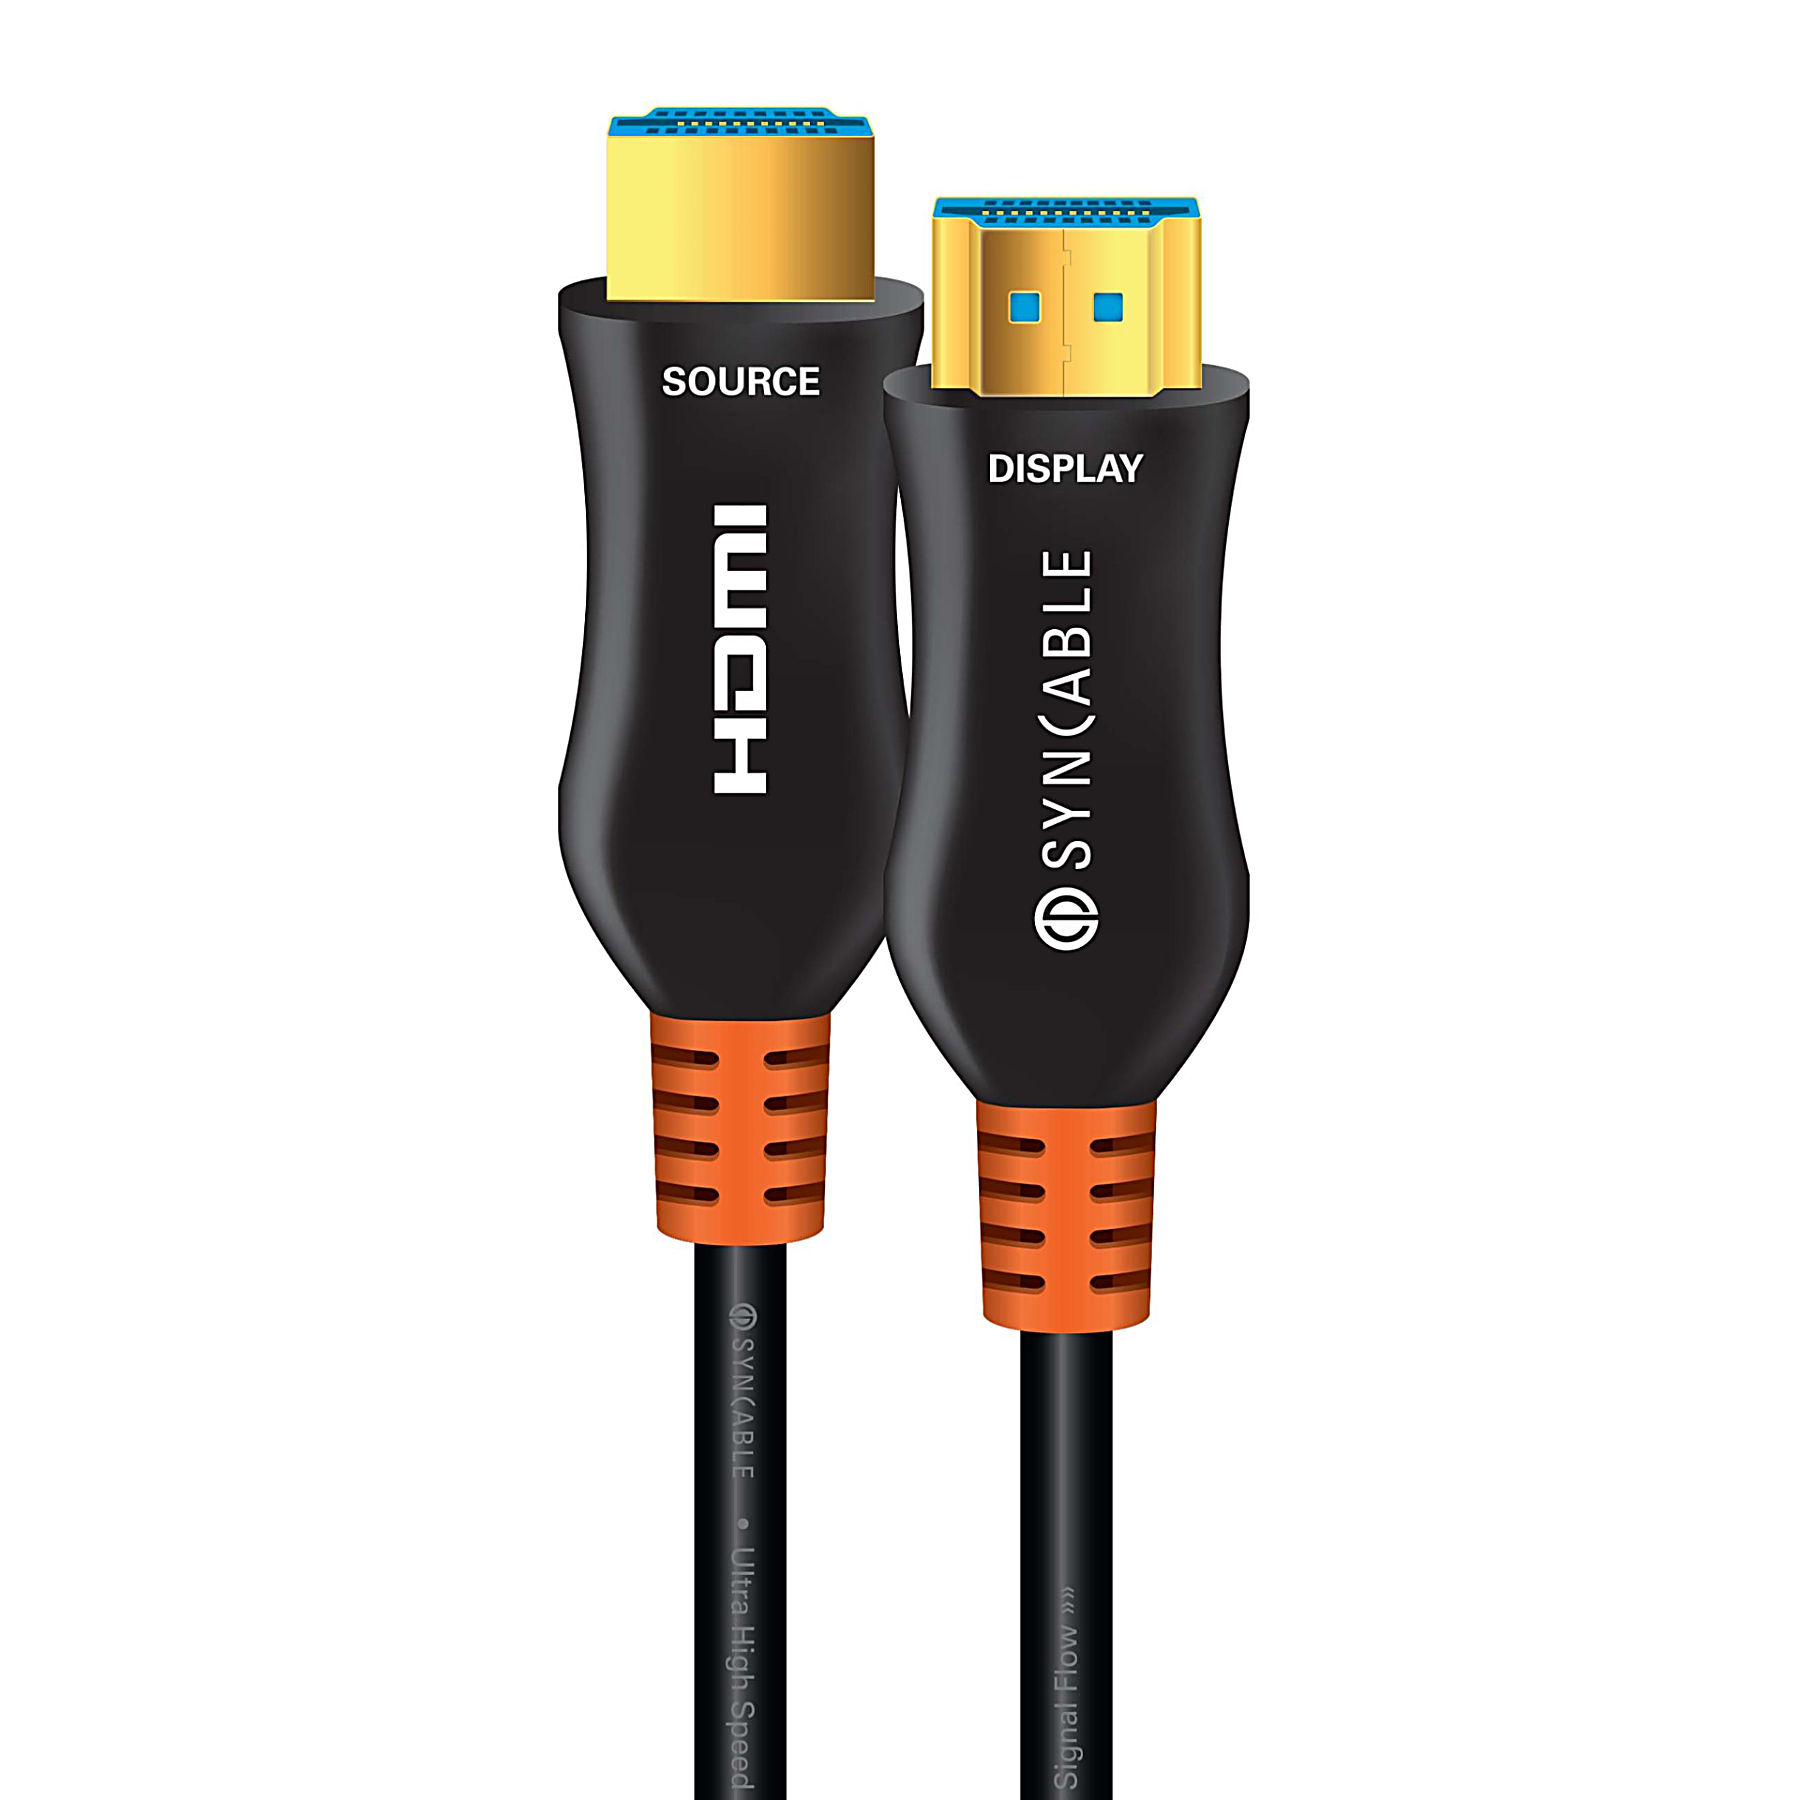 15m 4K HDMI Active Optical Cable